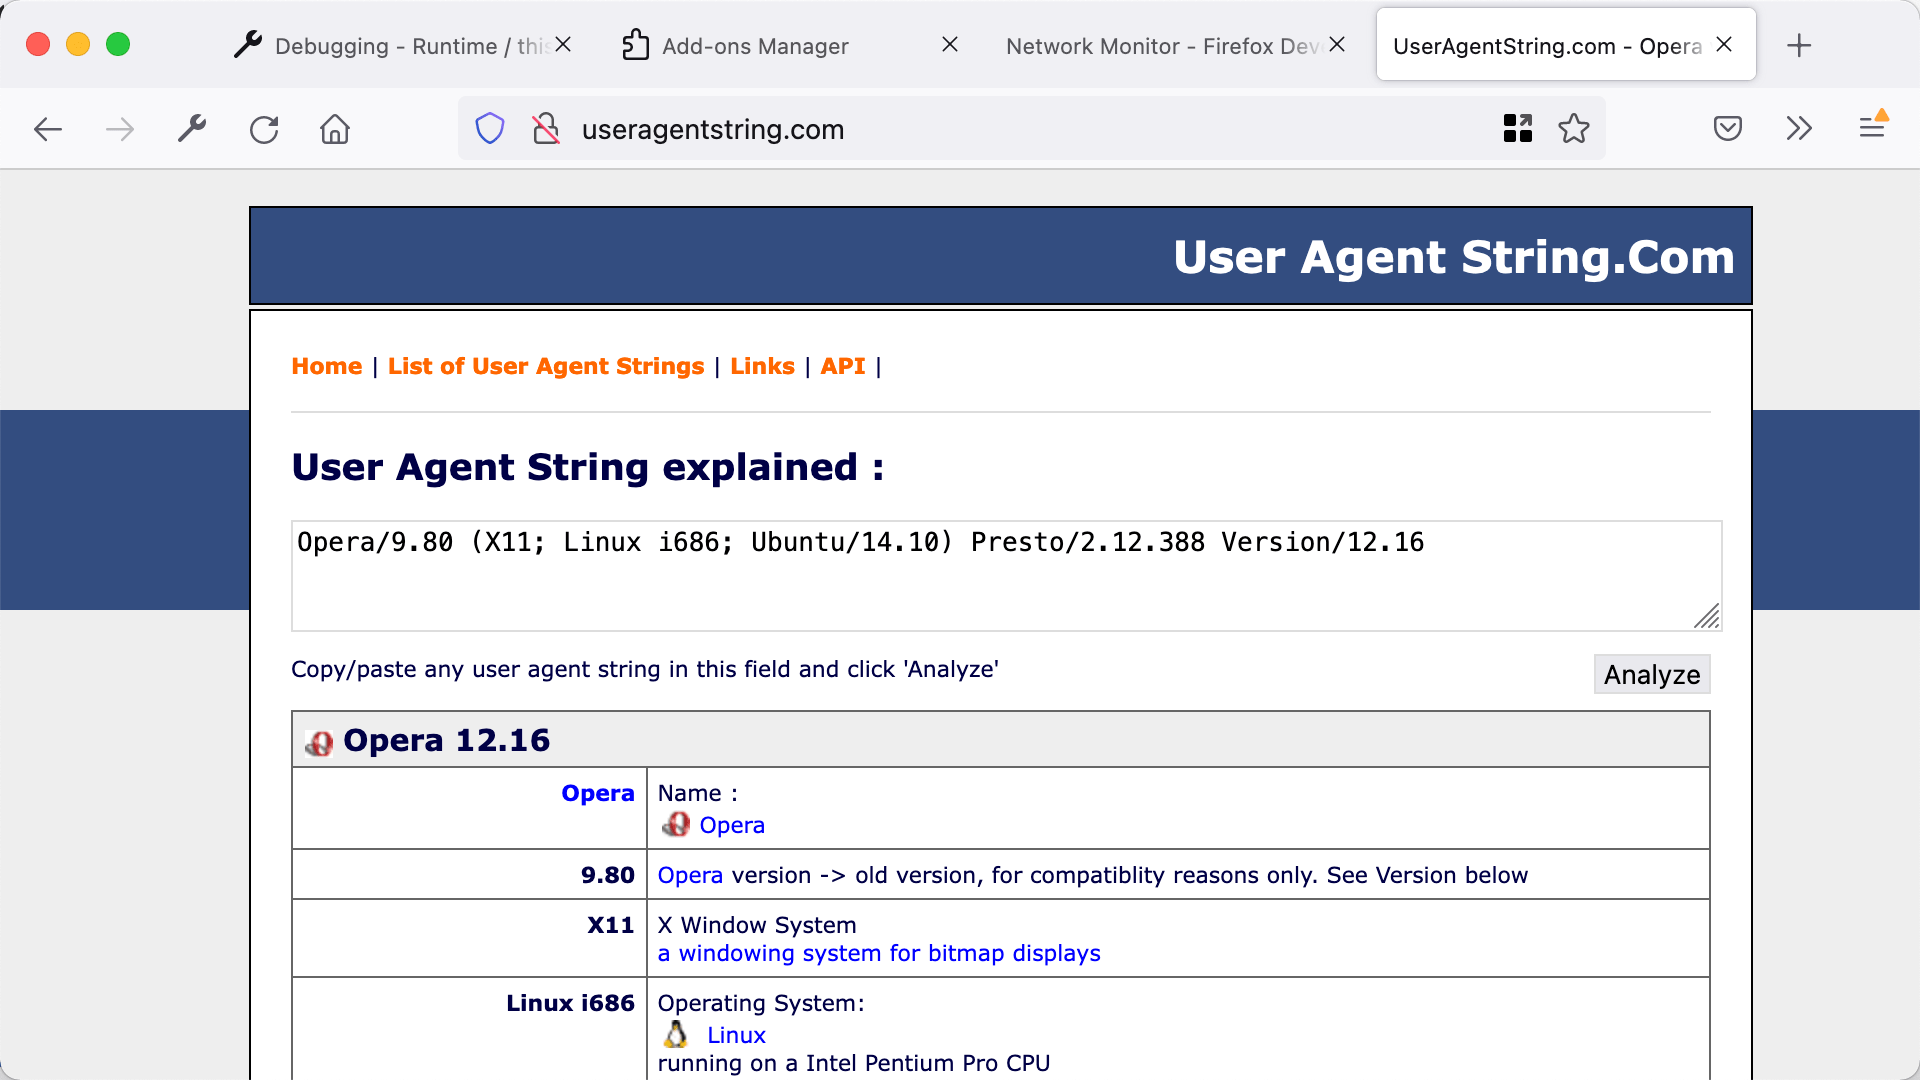 useragentstring.com showing details of the modified user agent string